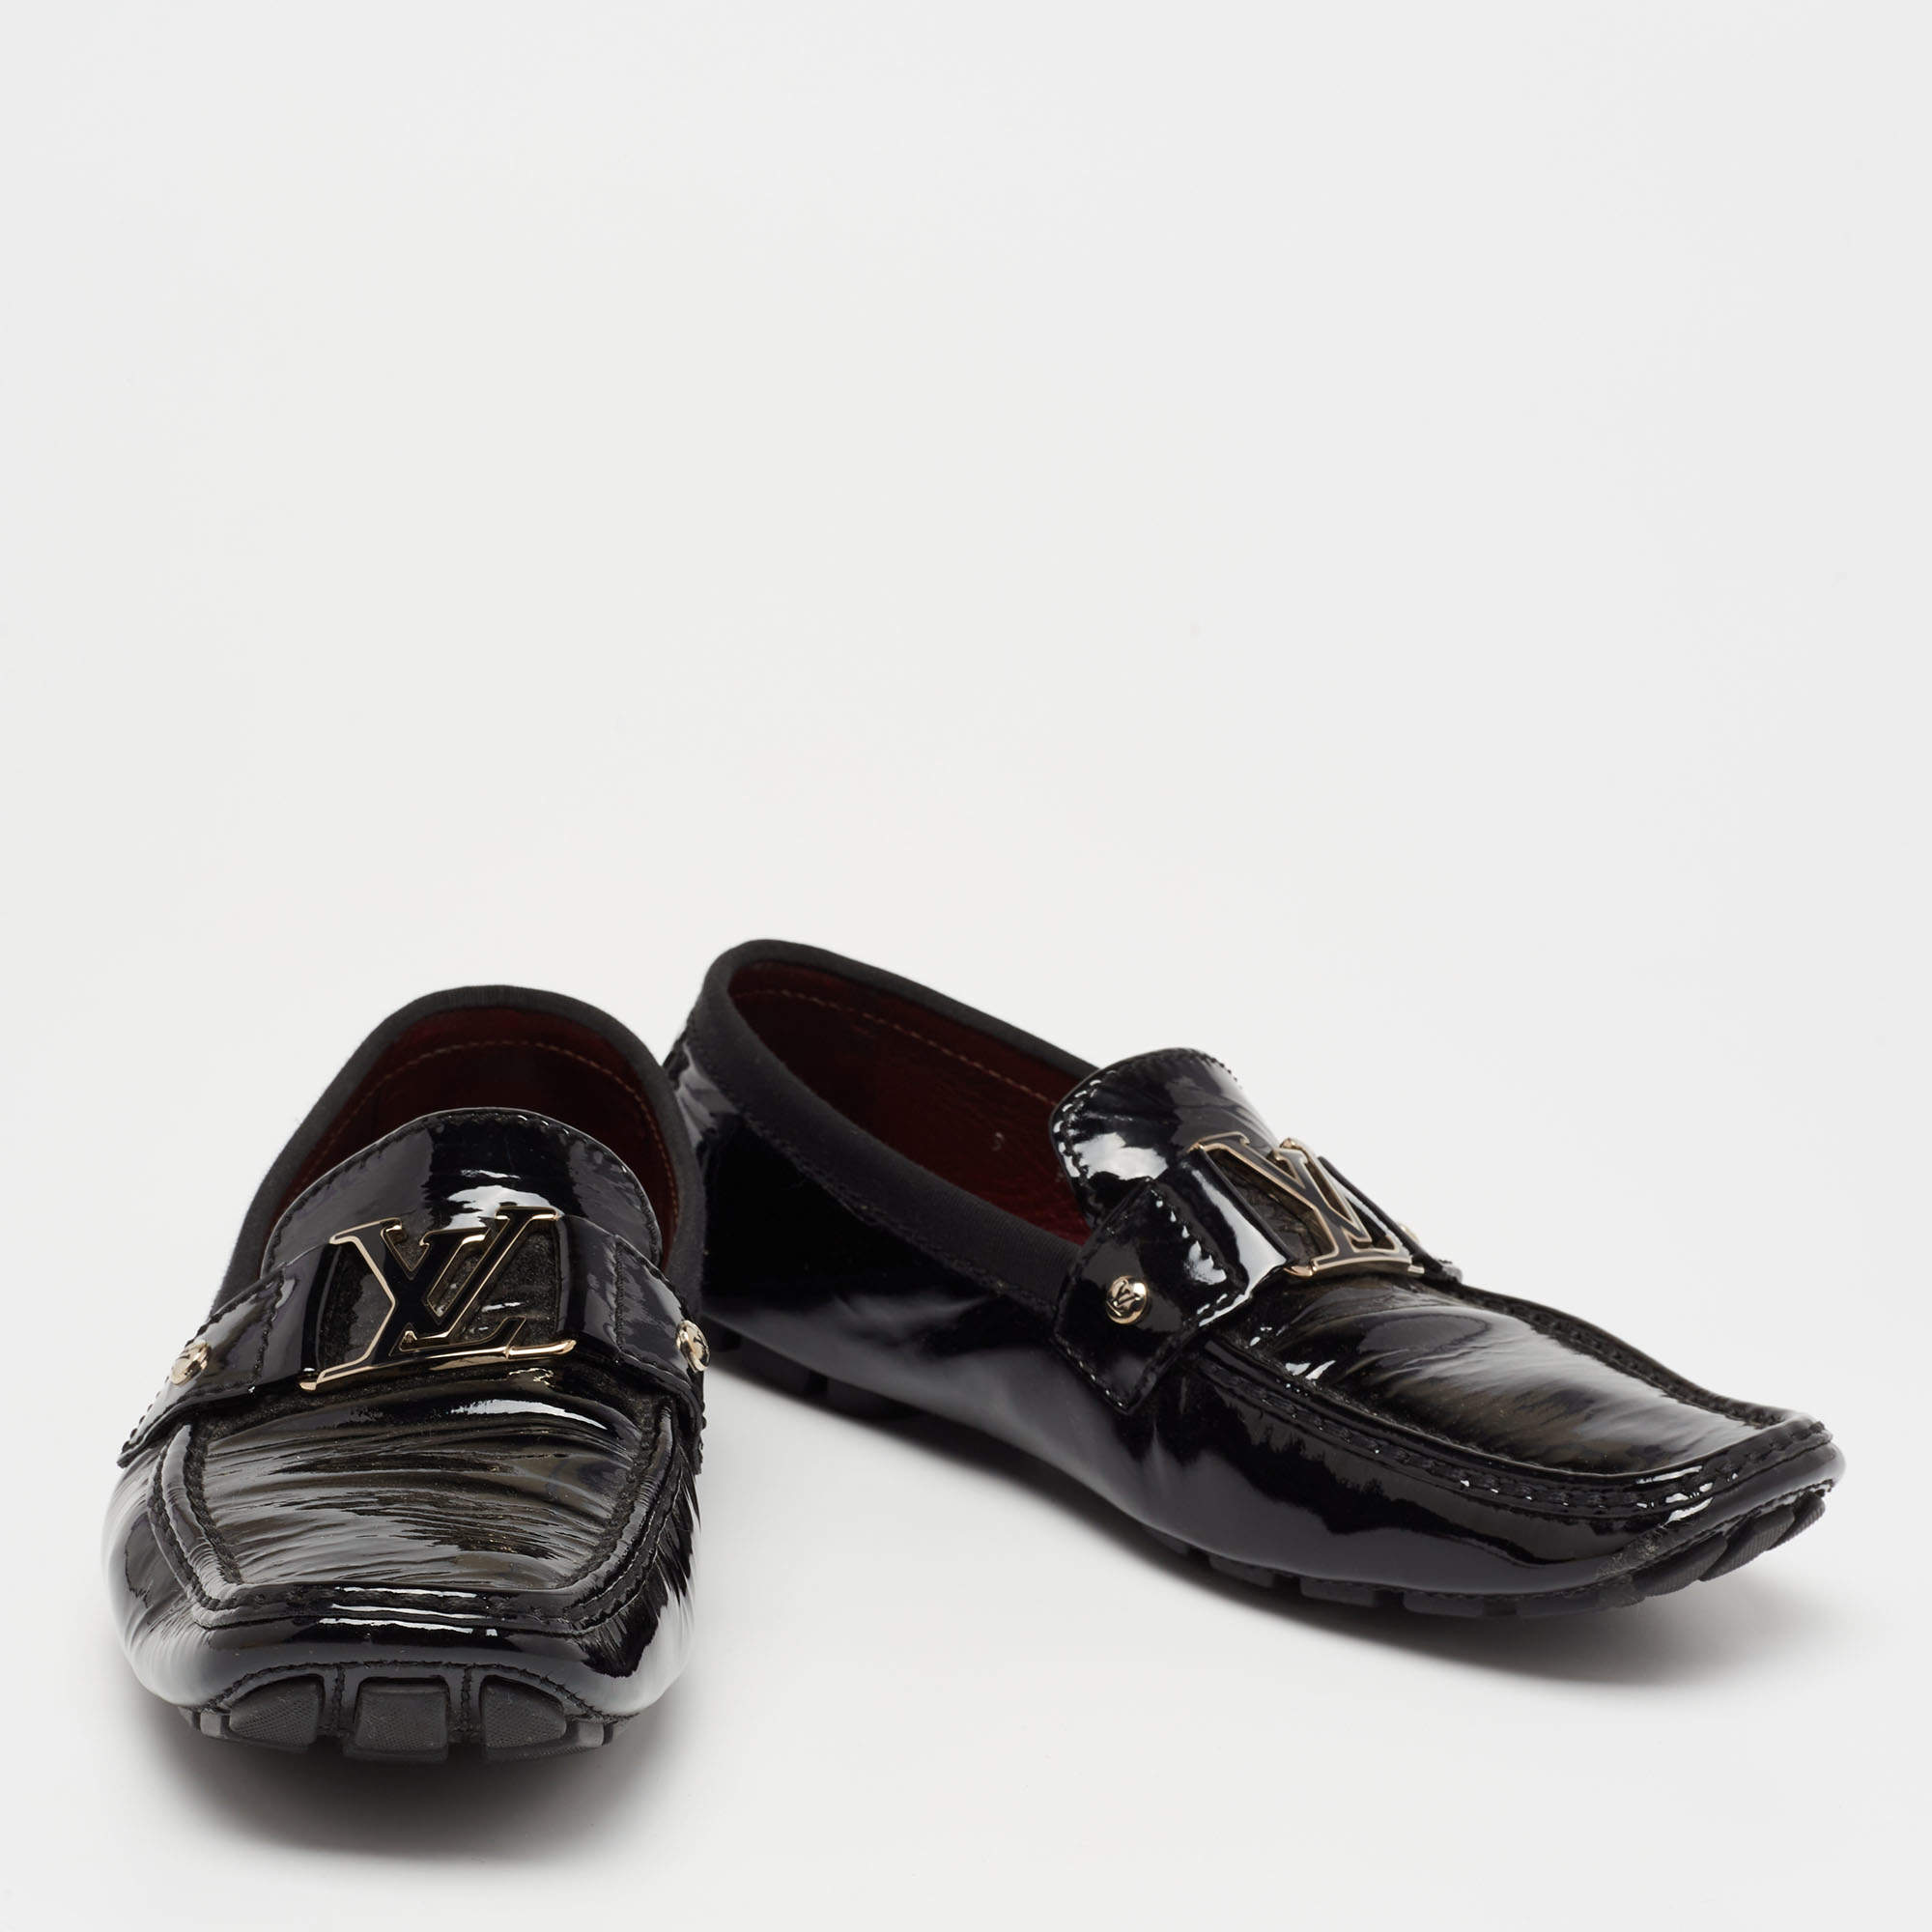 Monte carlo patent leather flats Louis Vuitton Black size 42 EU in Patent  leather - 34405383